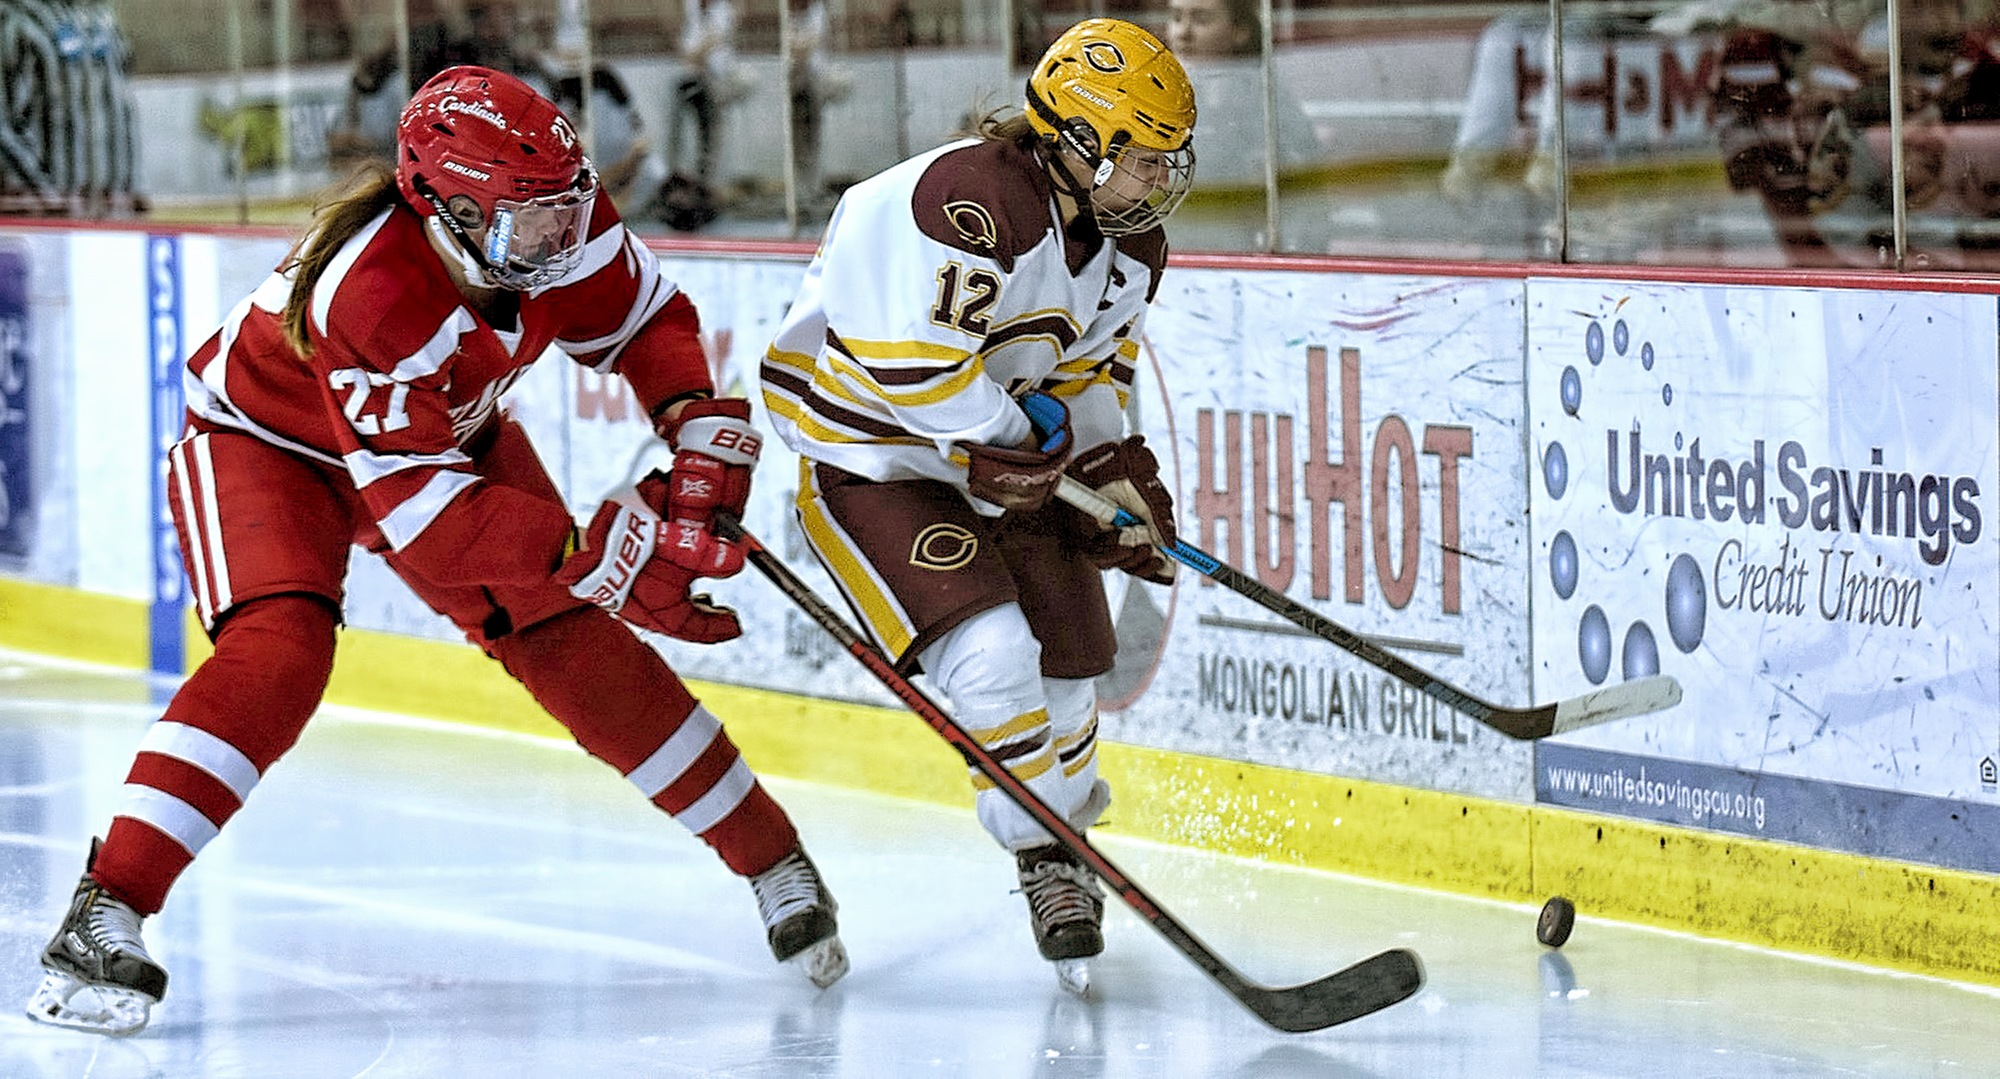 Senior Megan Dondelinger carries the puck into the St. Mary's zone during the Cobbers' 2-1 OT loss. Dondelinger had the only CC goal in the game.